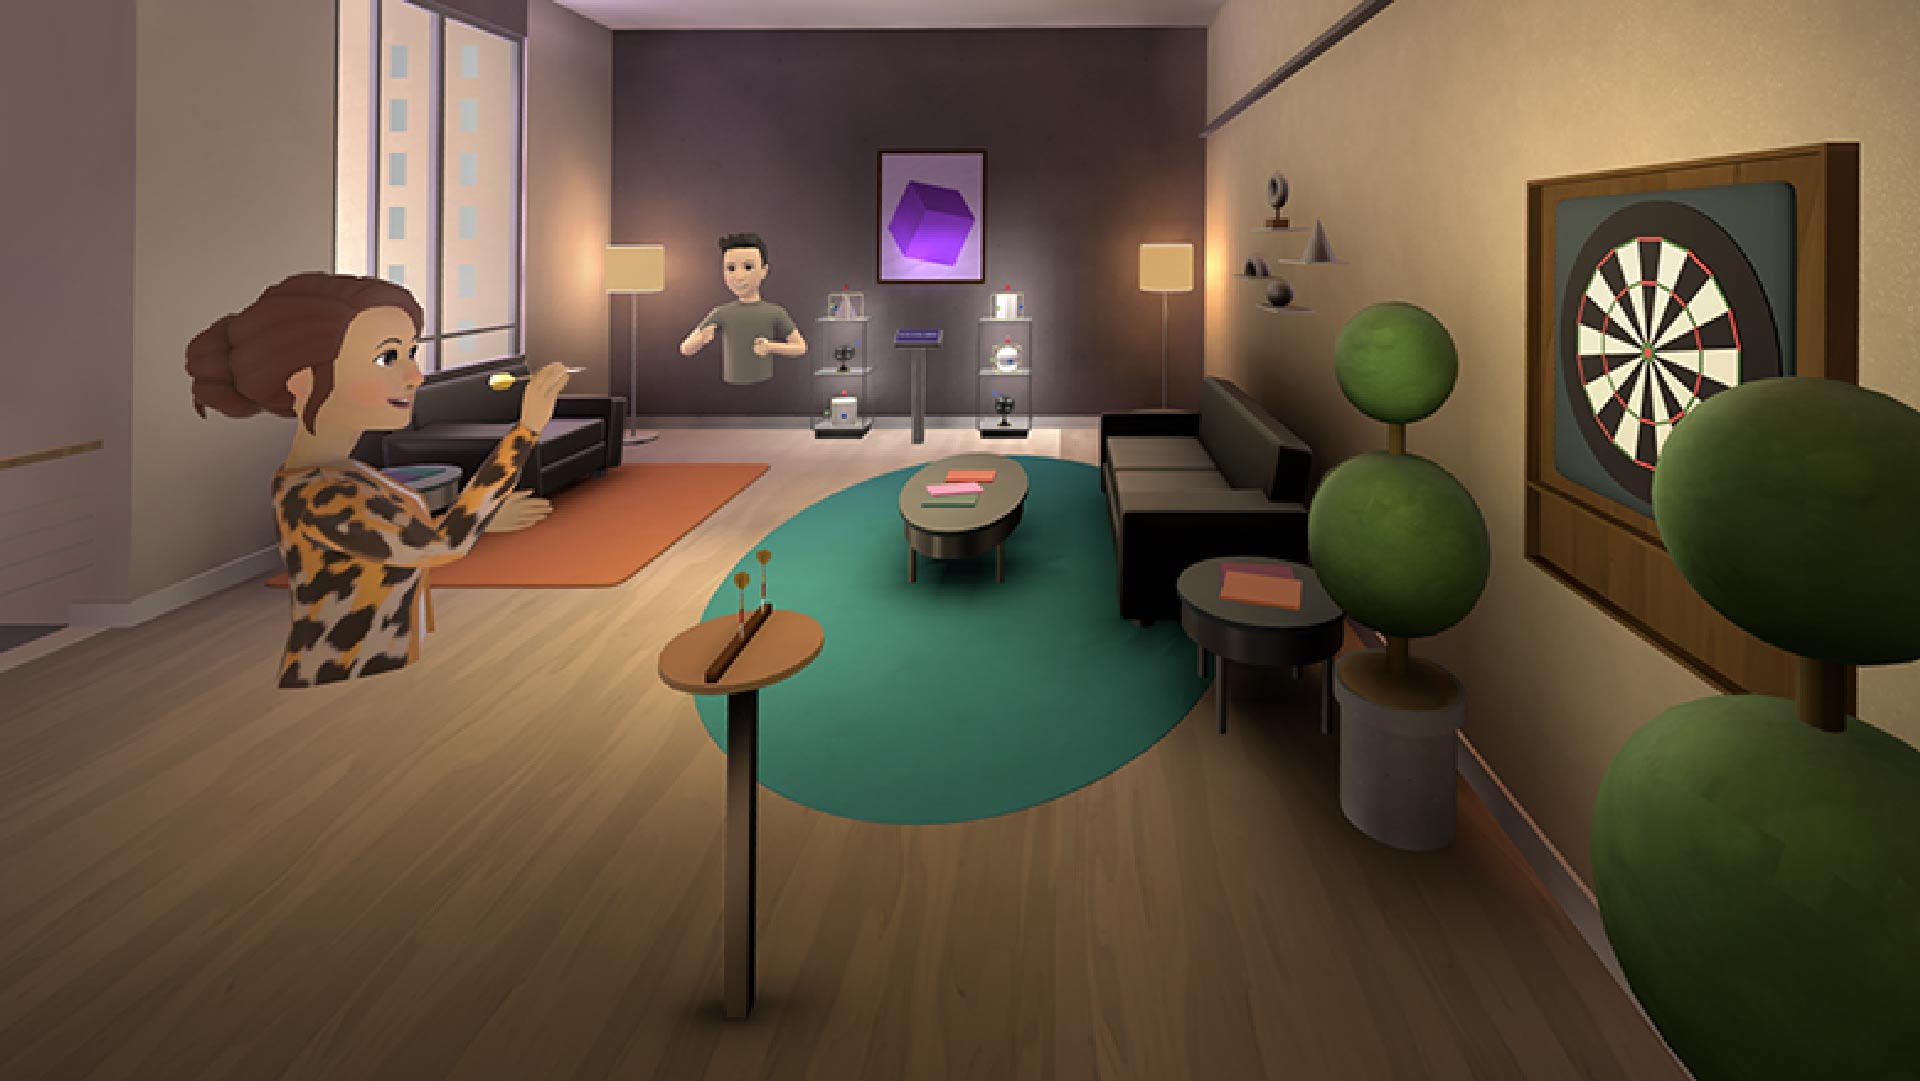 Meta is Adding Private Homes to ‘Horizon Worlds’ for Hangouts with Friends – Road to VR